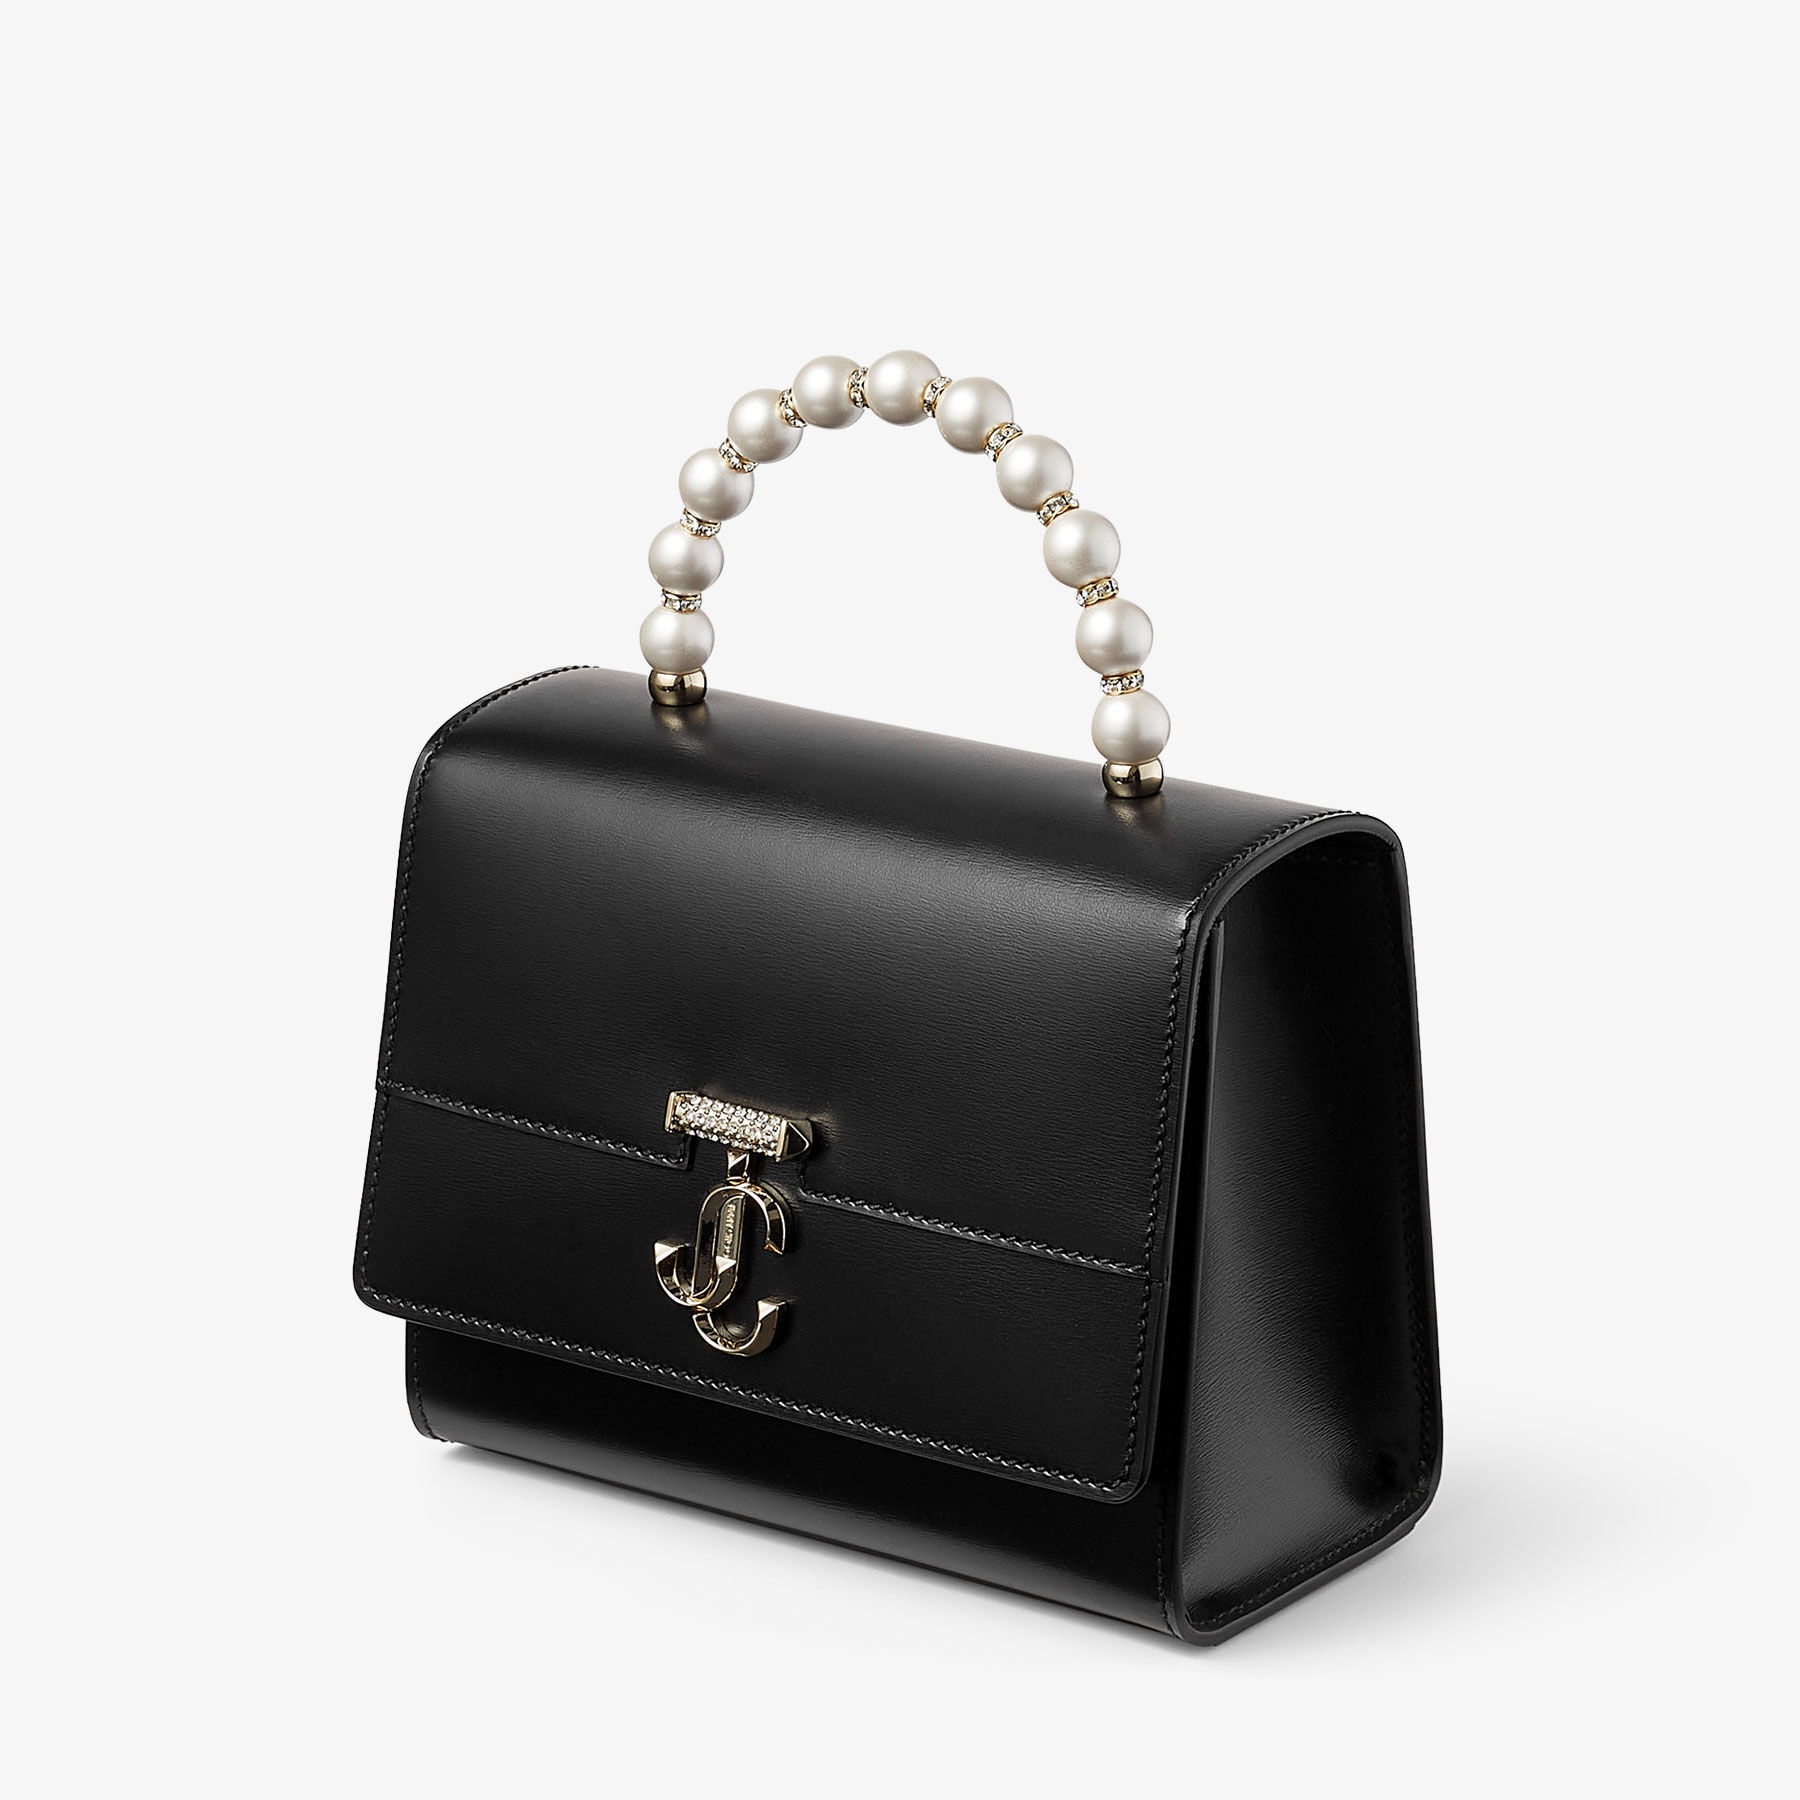 Avenue Top Handle/S
Black Box Leather Top Handle Bag with Pearls - 2